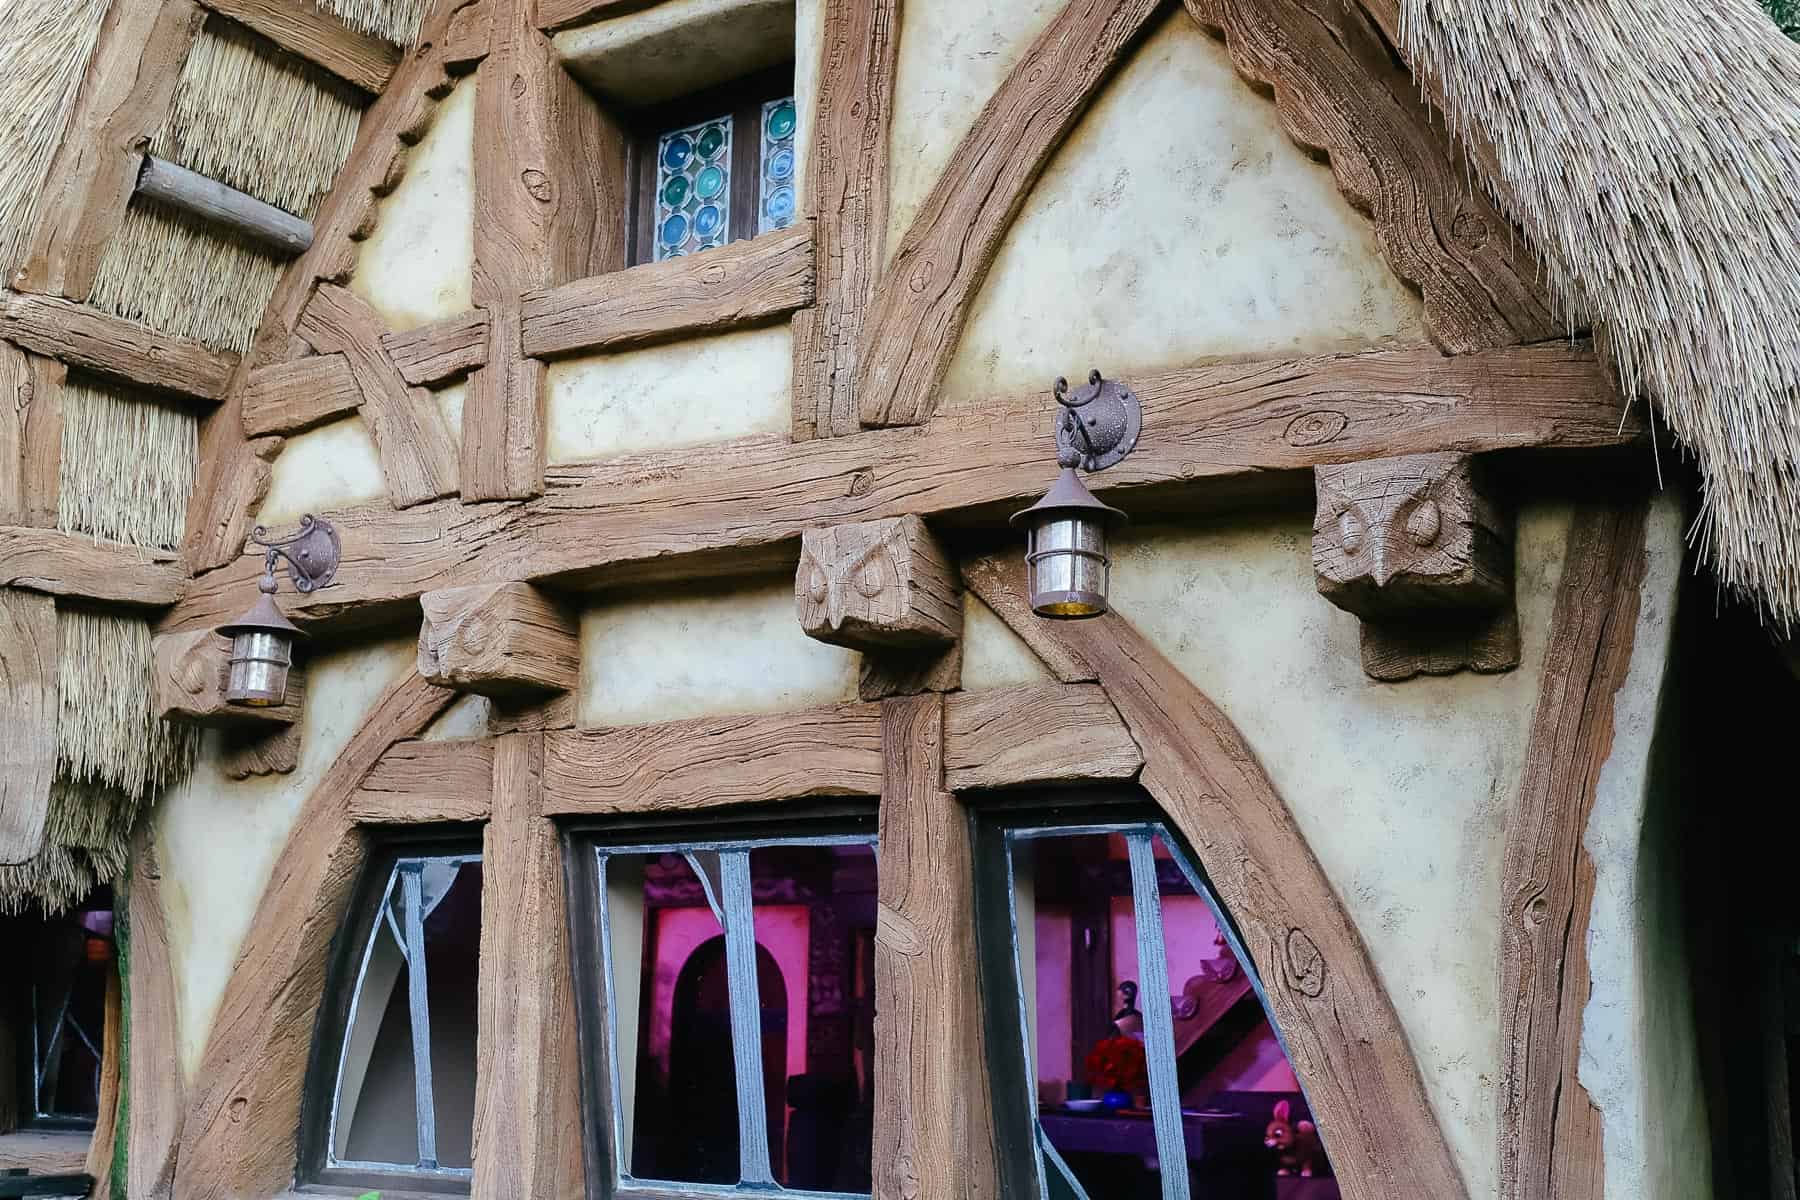 The cottage at the end of the ride where you can see Snow White dancing with the Seven Dwarfs. 